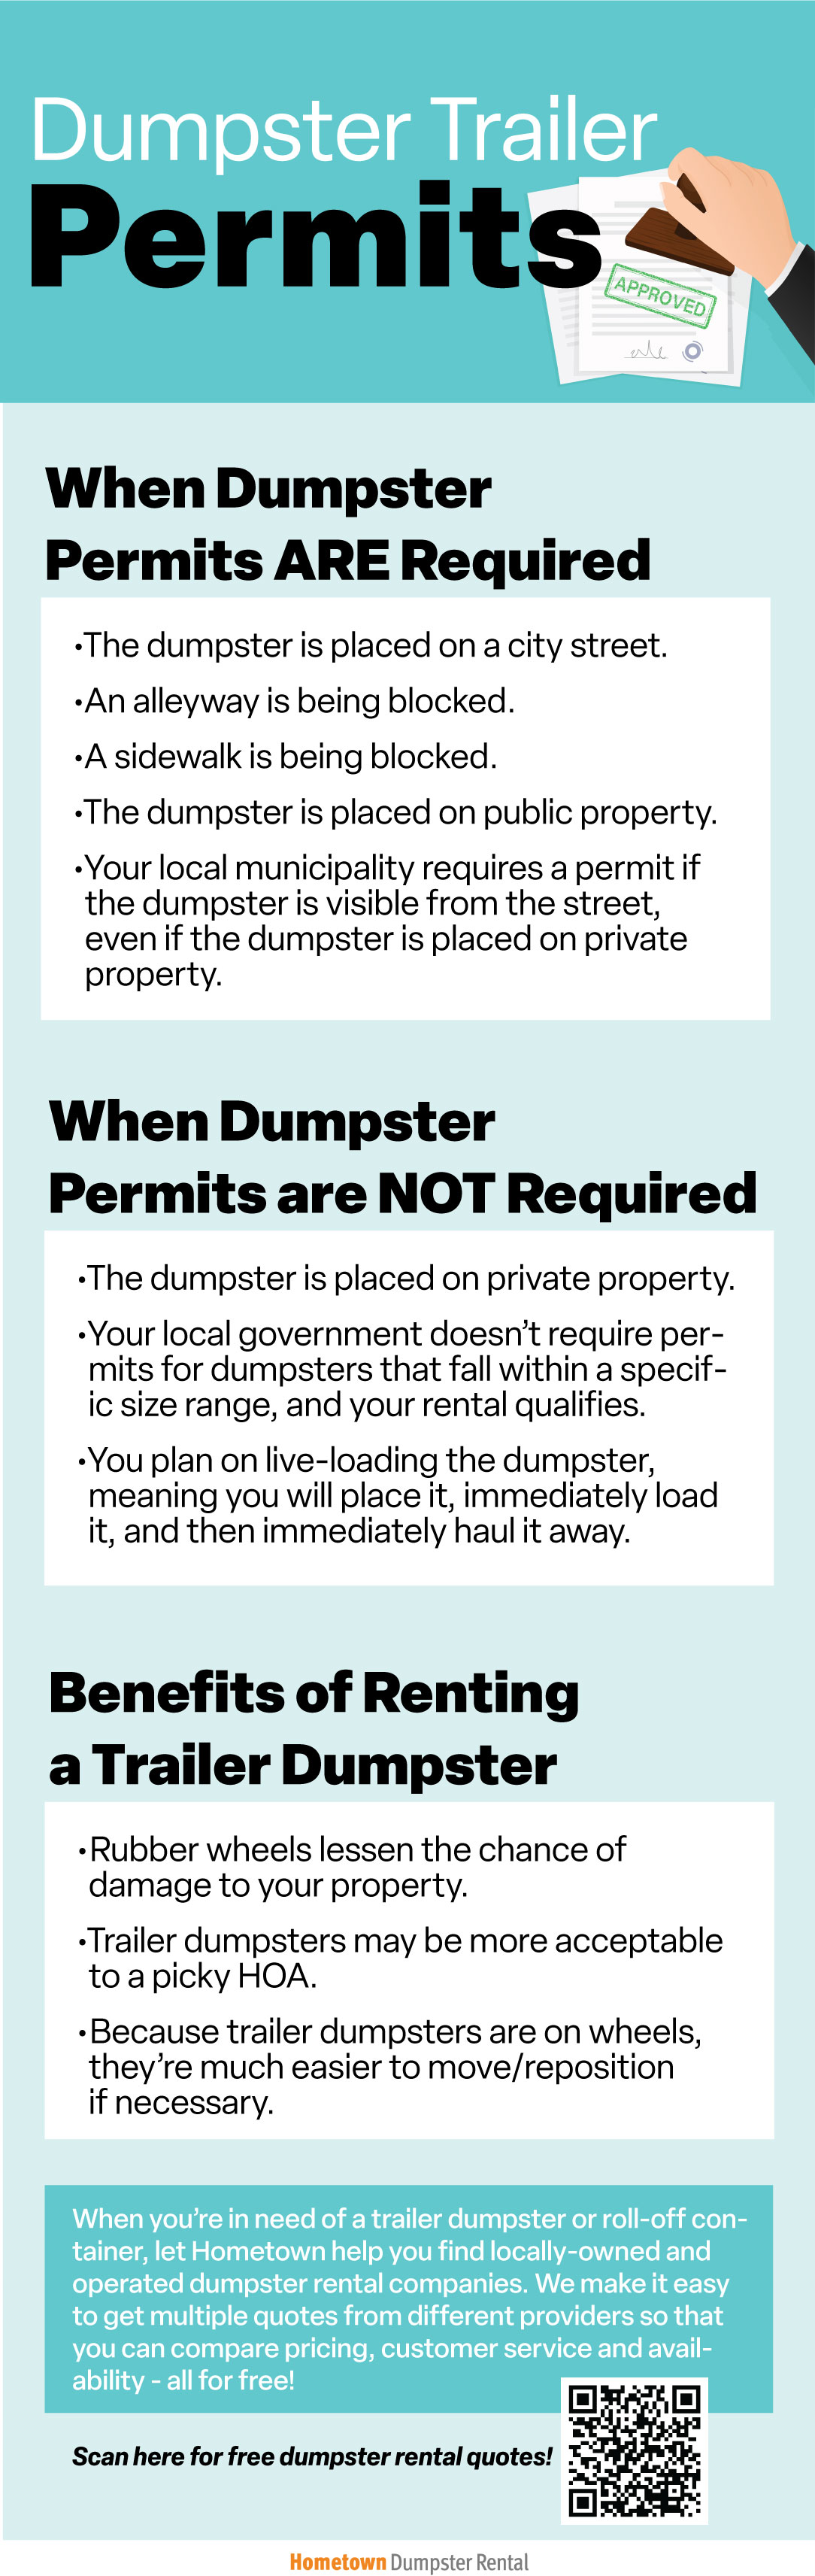 Do Trailer Dumpsters Require a Permit? Infographic